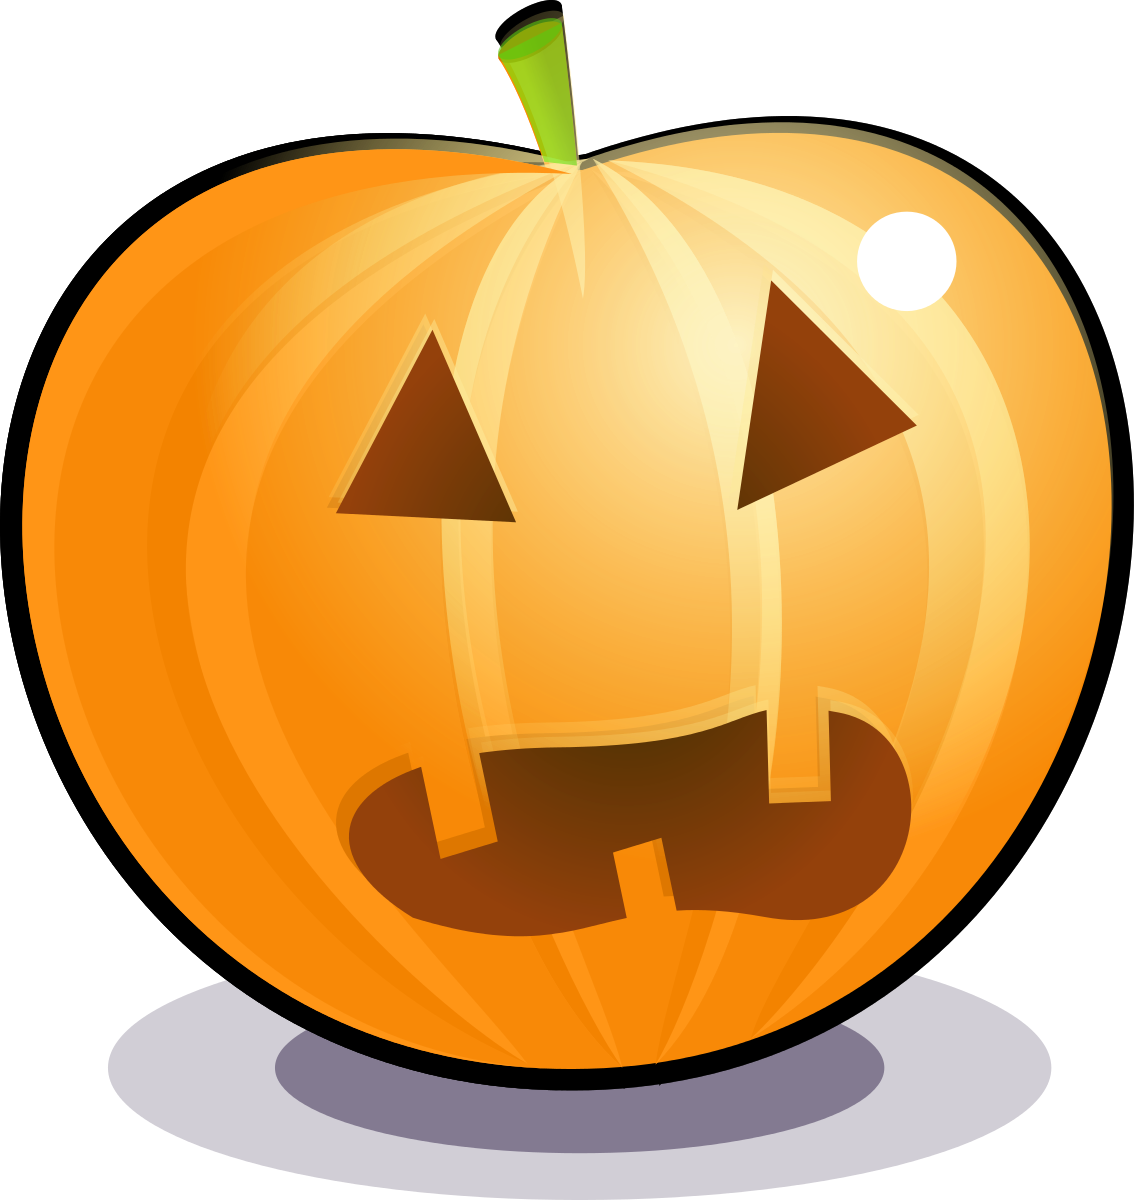 Scared Pumpkin Clipart by Magnesus : Halloween Cliparts #10953 ...